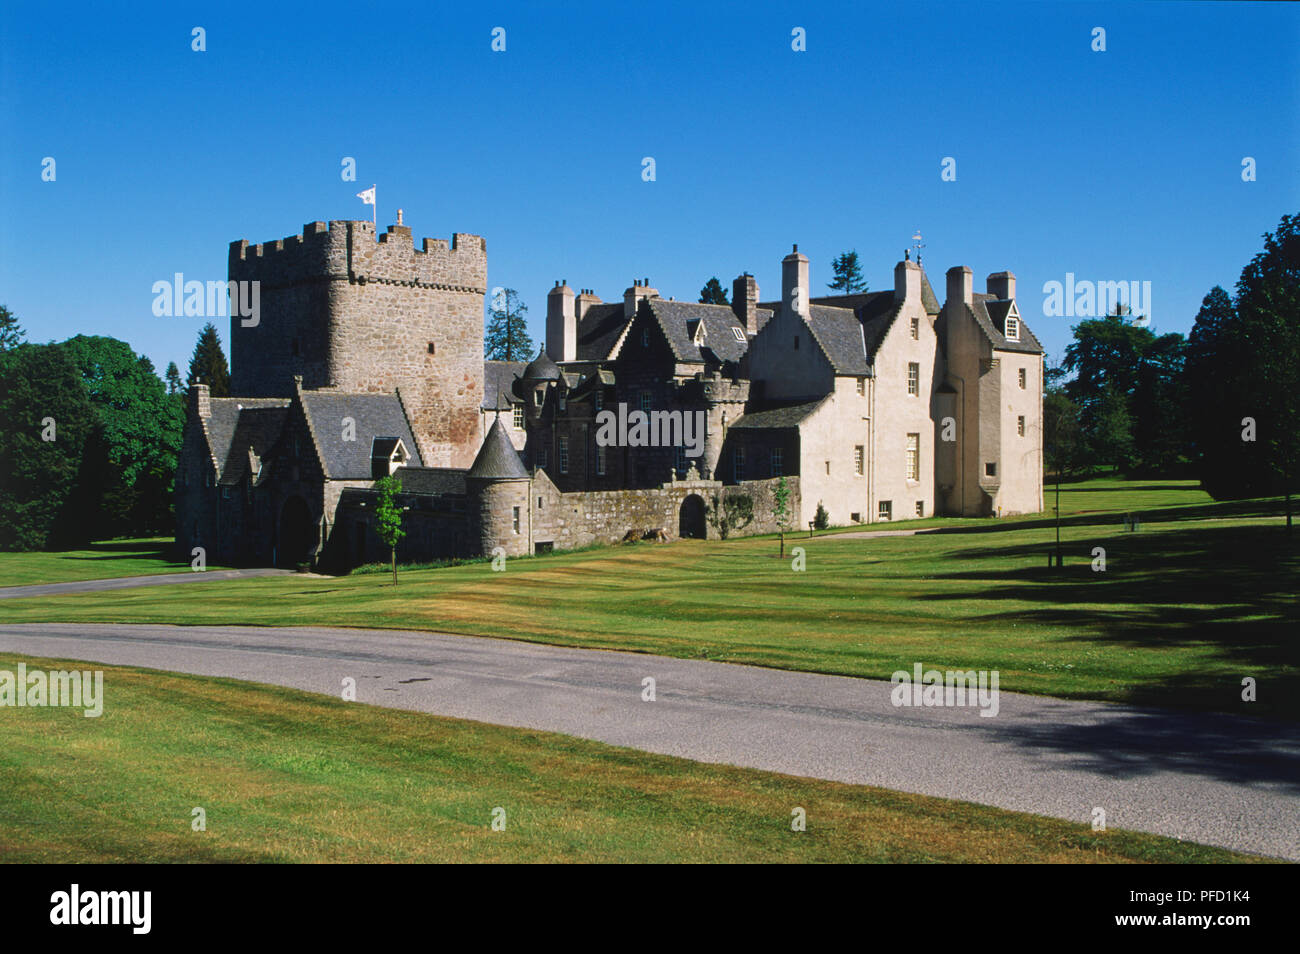 Great Britain, Scotland, Aberdeenshire, Drum Castle, thirteenth-century keep with a mansion house with sweeping lawns. Stock Photo